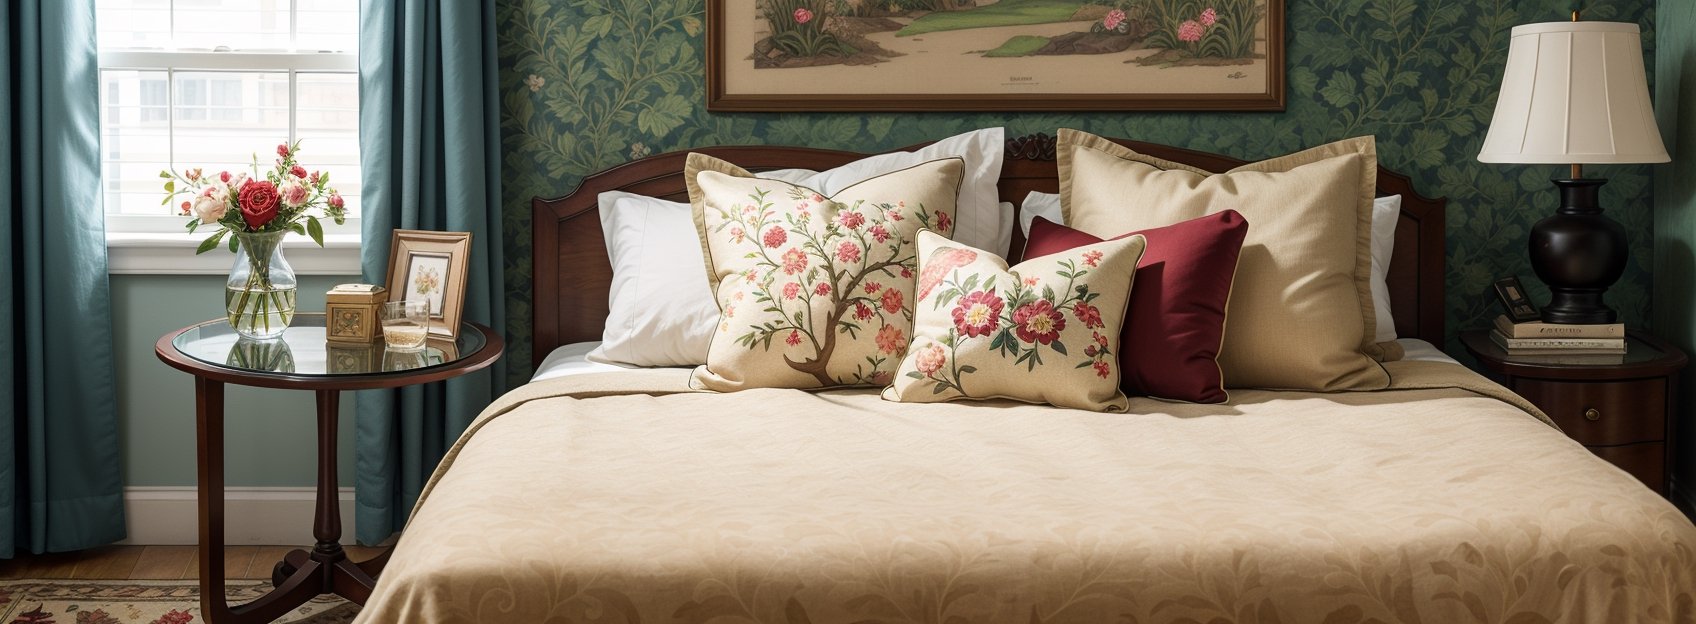 style by william morris art, classic livingroom, (high quality, very_high_resolution), floral pattern, vintage, floral pattern, vintage bed, chair, walls, carpets, door, window, nightstand, lamp, alarm clock, teddy, pillow, sheets, bedspread, glass of water, William Morris Art,William Morris Art,texture wm